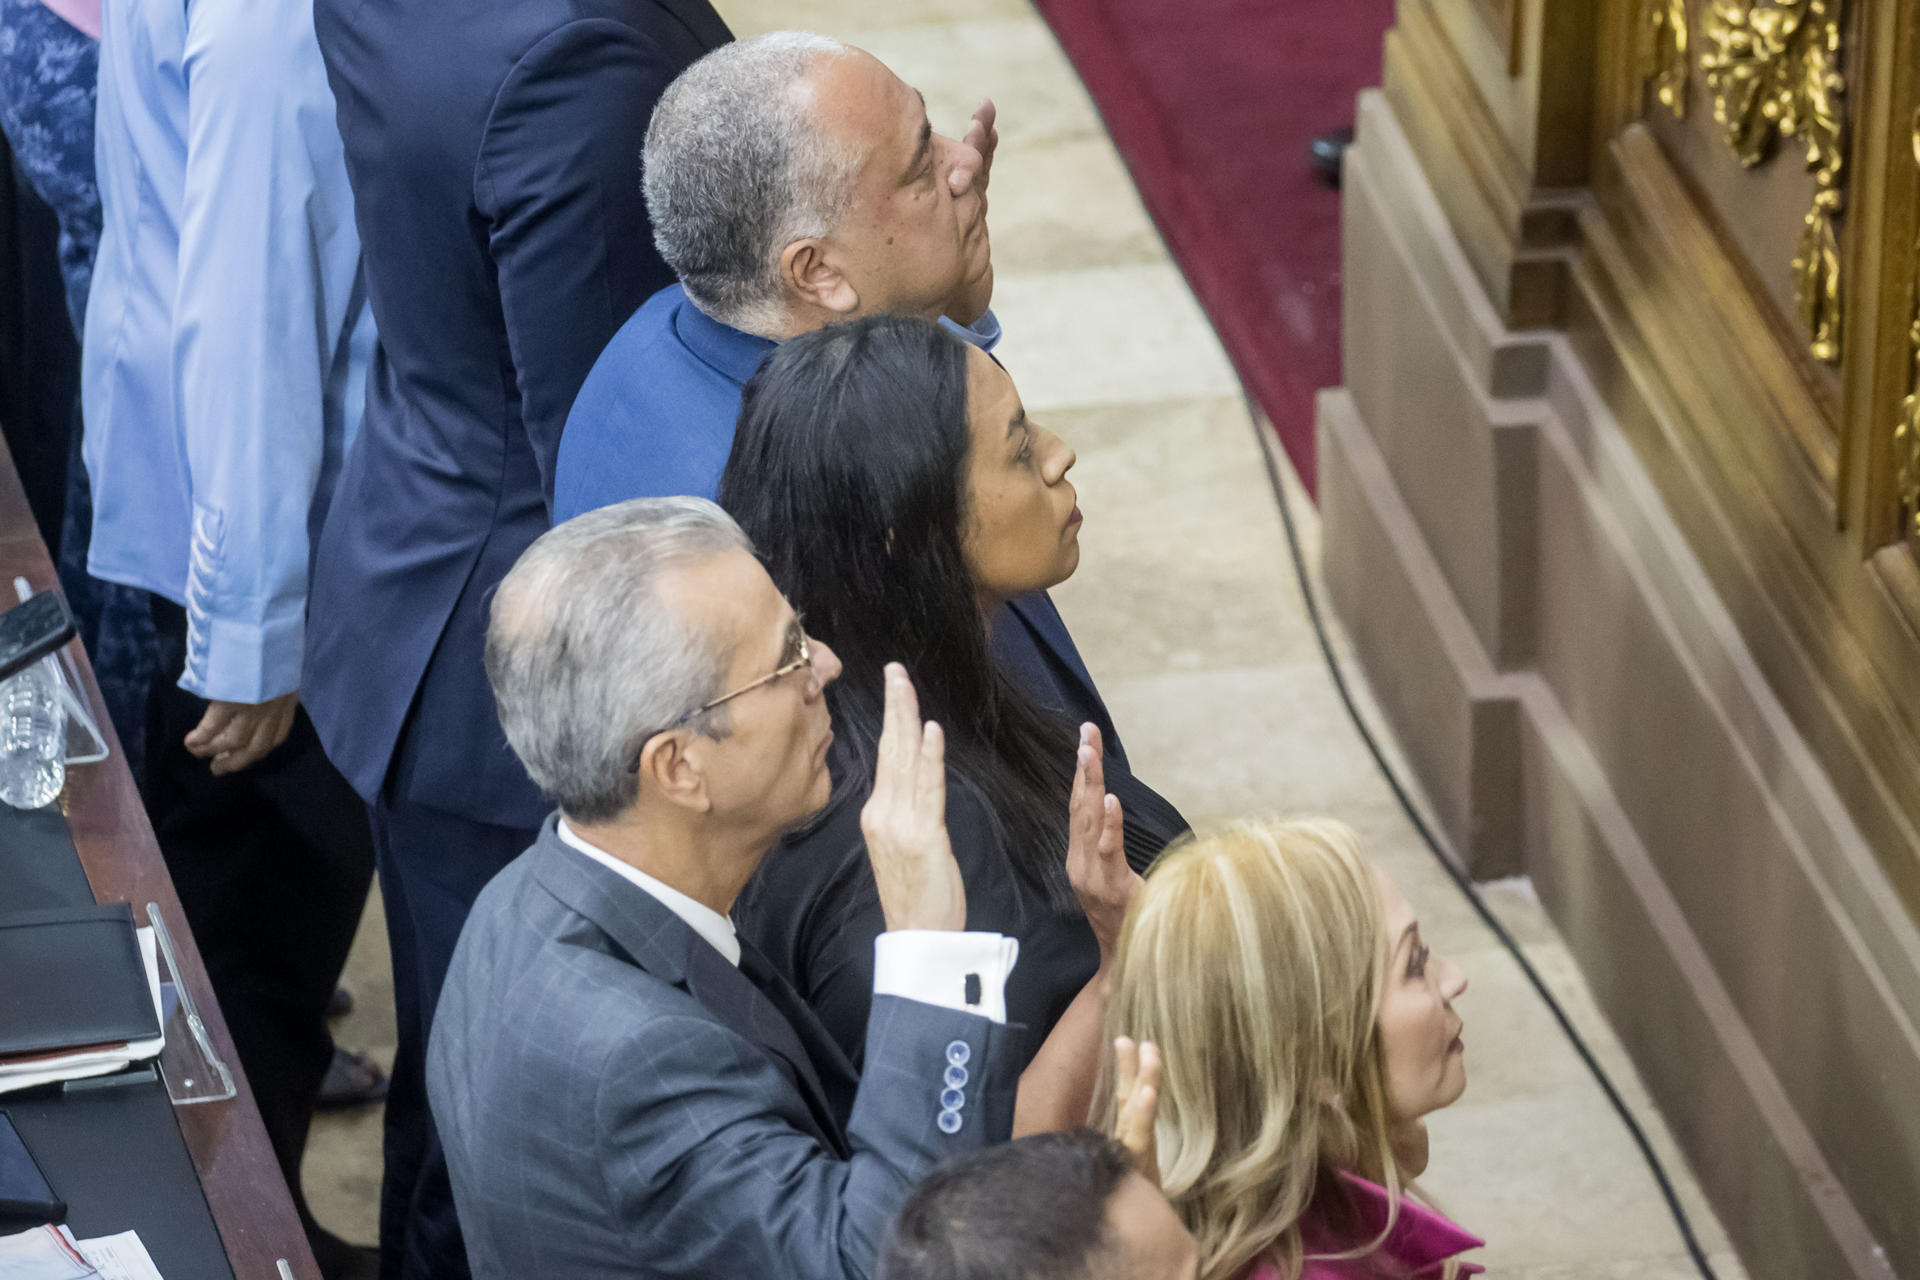 Elvis Amoroso (Up), Aime Nogal (2-R), Juan del Pino (L) and Rosalba Gil attend the Hemicycle of Sessions of the Federal Legislative Palace of the National Assembly., in Caracas, Venezuela, on 24 August 2023. EFE-EPA/Miguel Gutiérrez